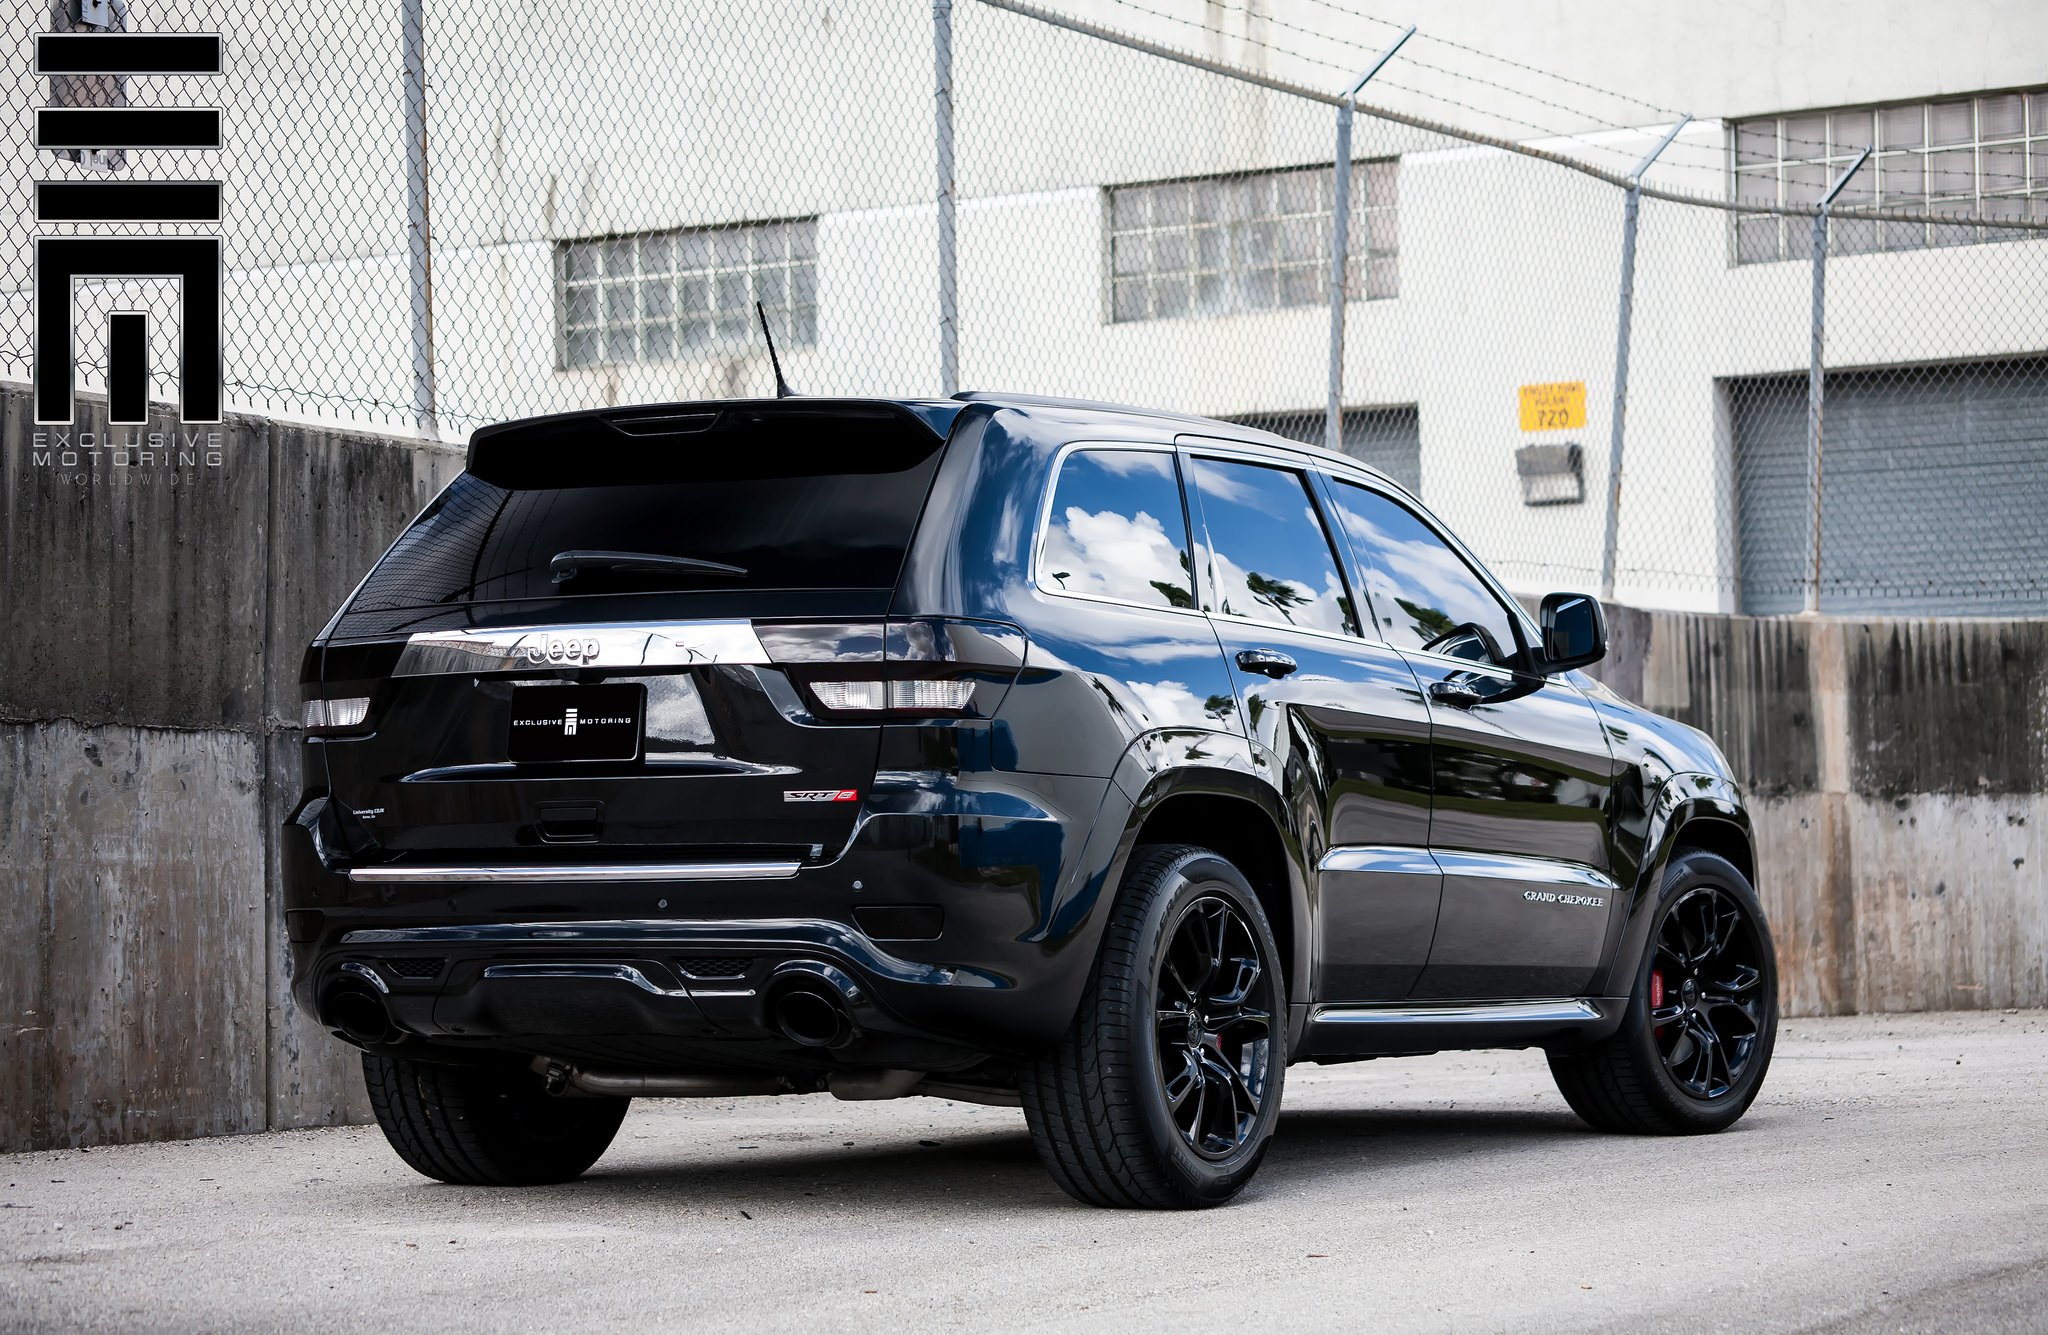 Jeep Grand Cherokee SRT8 Black Taillights - Photo by Exclusive Motoring